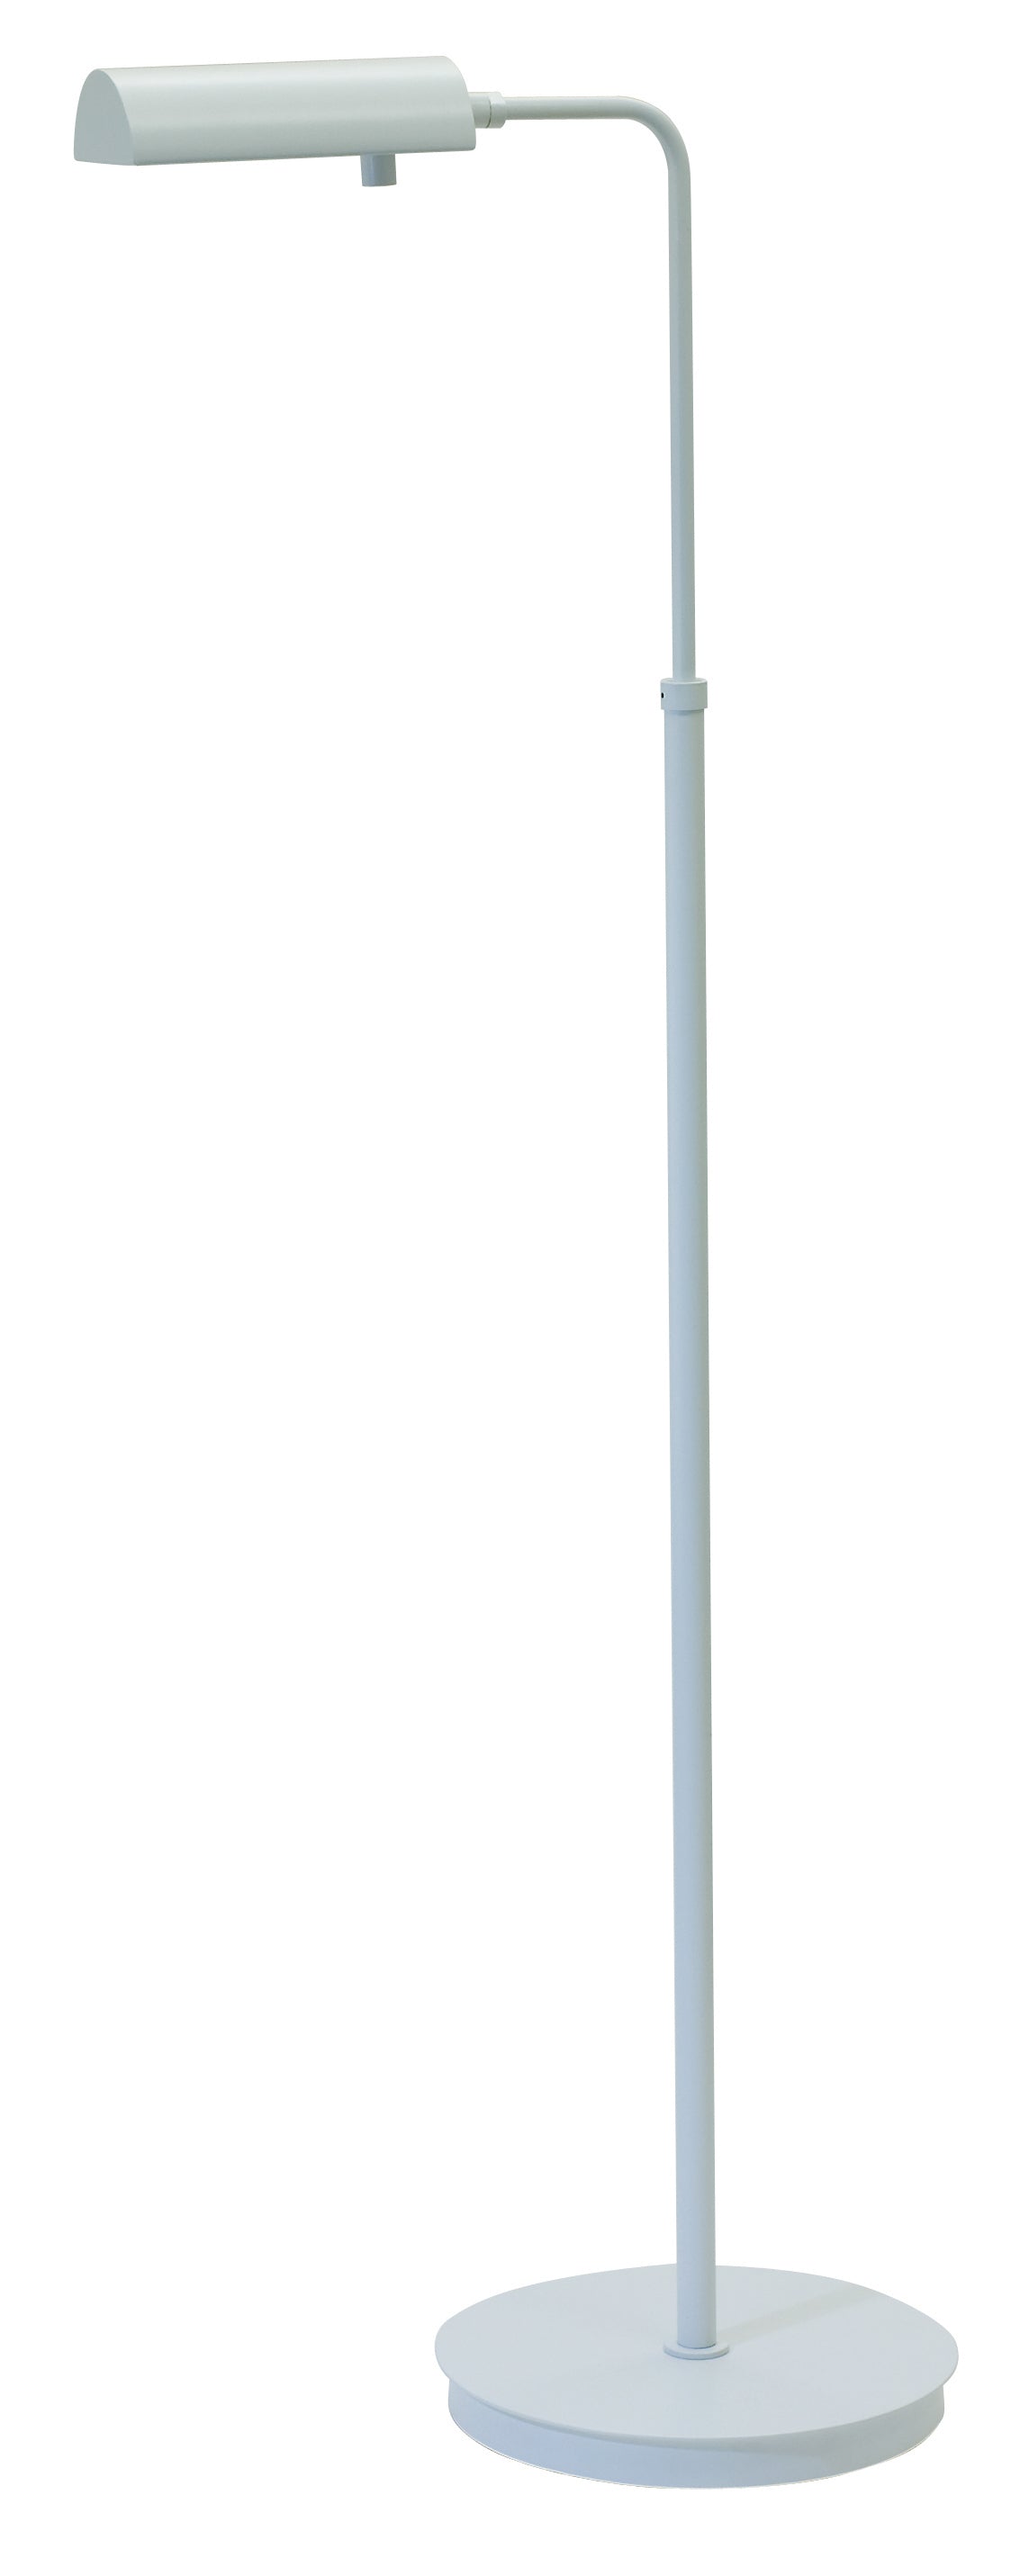 House of Troy Generation Collection Floor Lamp in White G100-WT